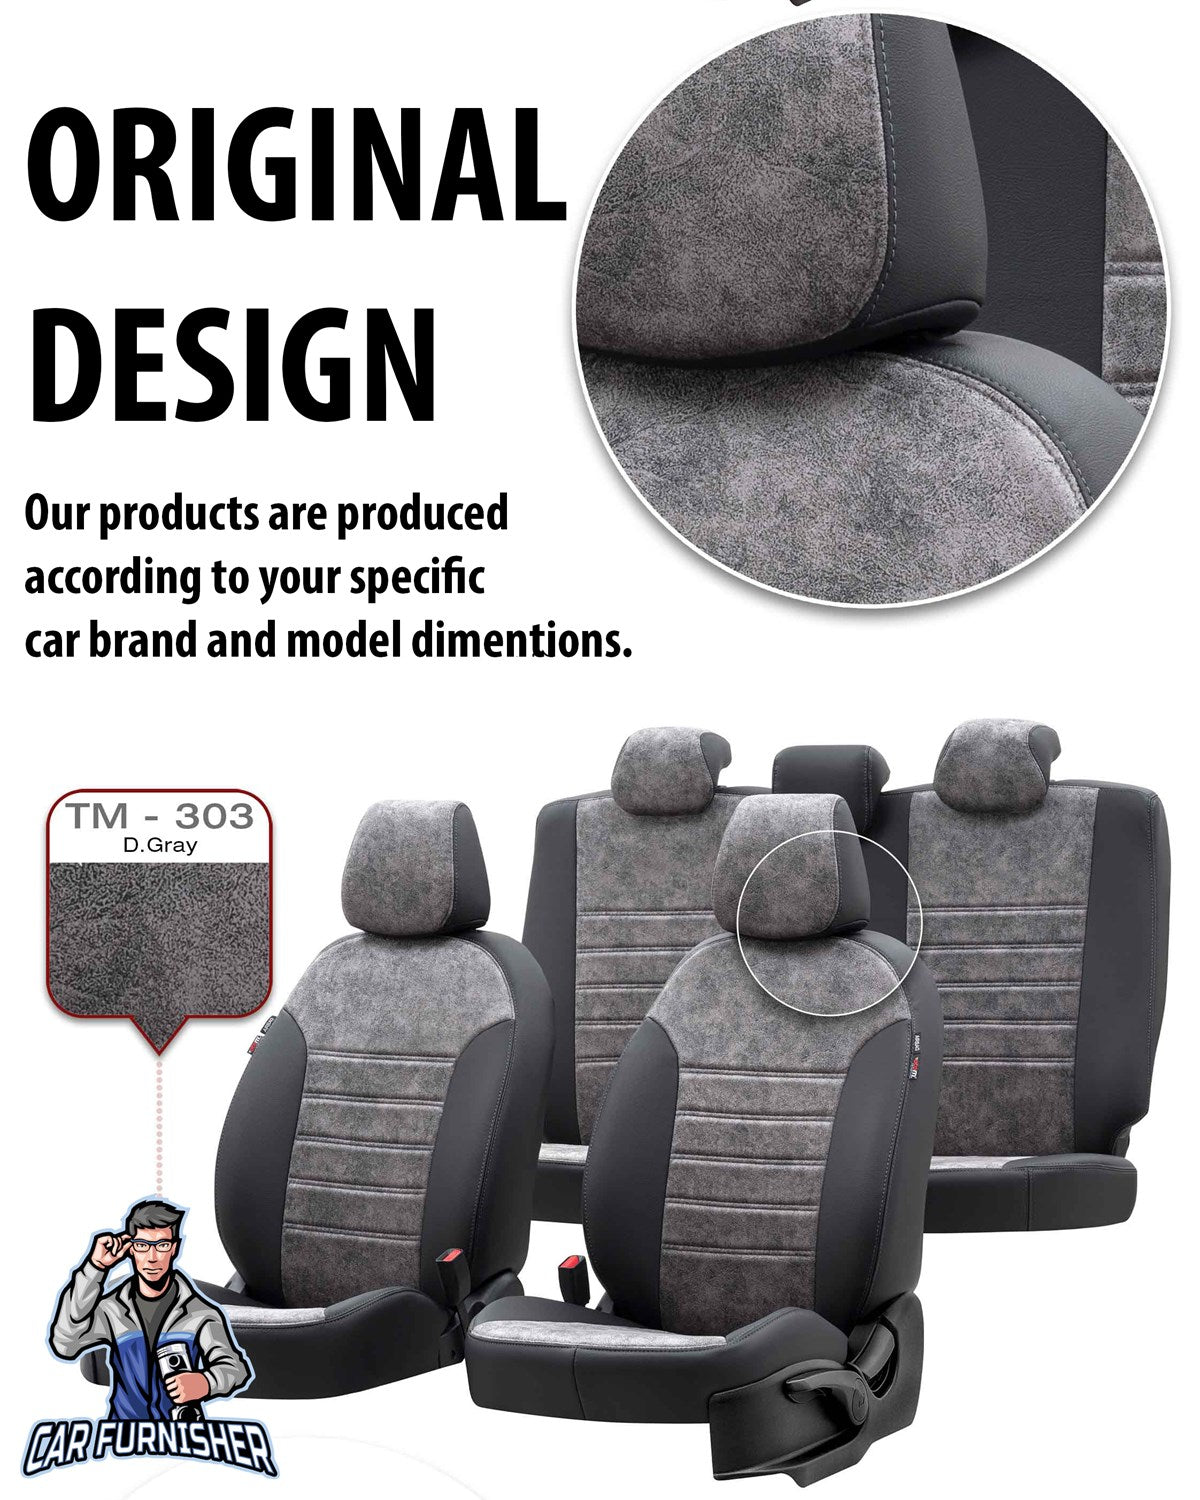 Volkswagen Touareg Seat Cover Milano Suede Design Burgundy Leather & Suede Fabric